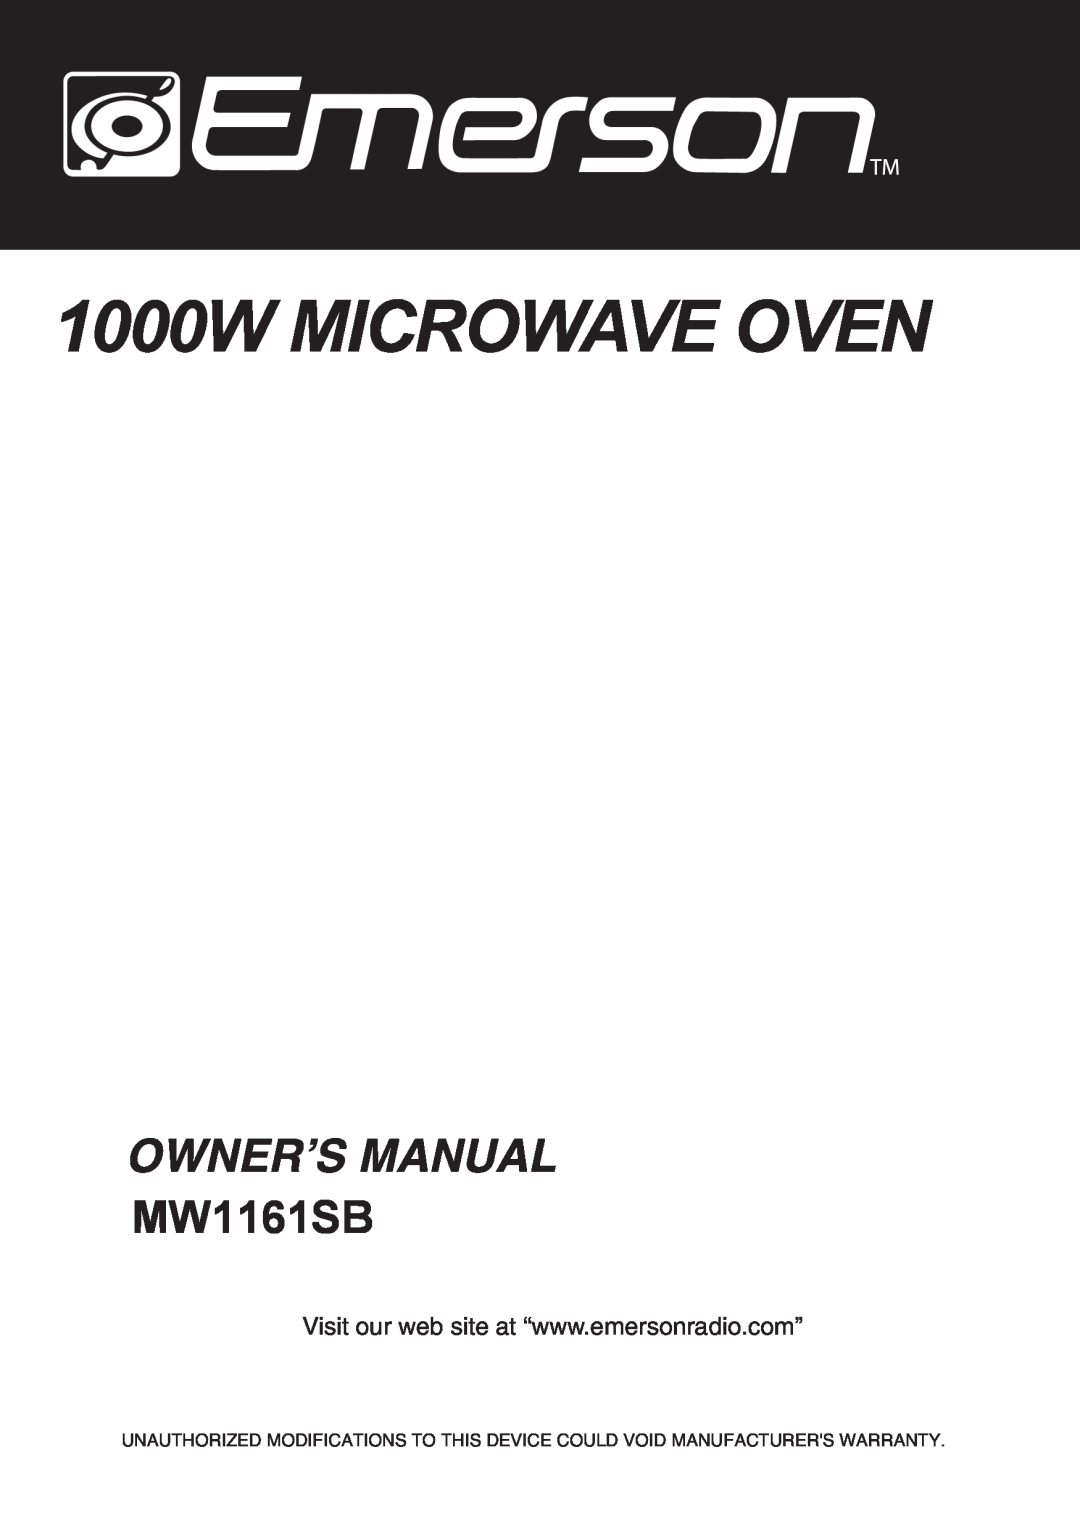 Emerson MW1161SB owner manual 1000W MICROWAVE OVEN, Owner’S Manual 